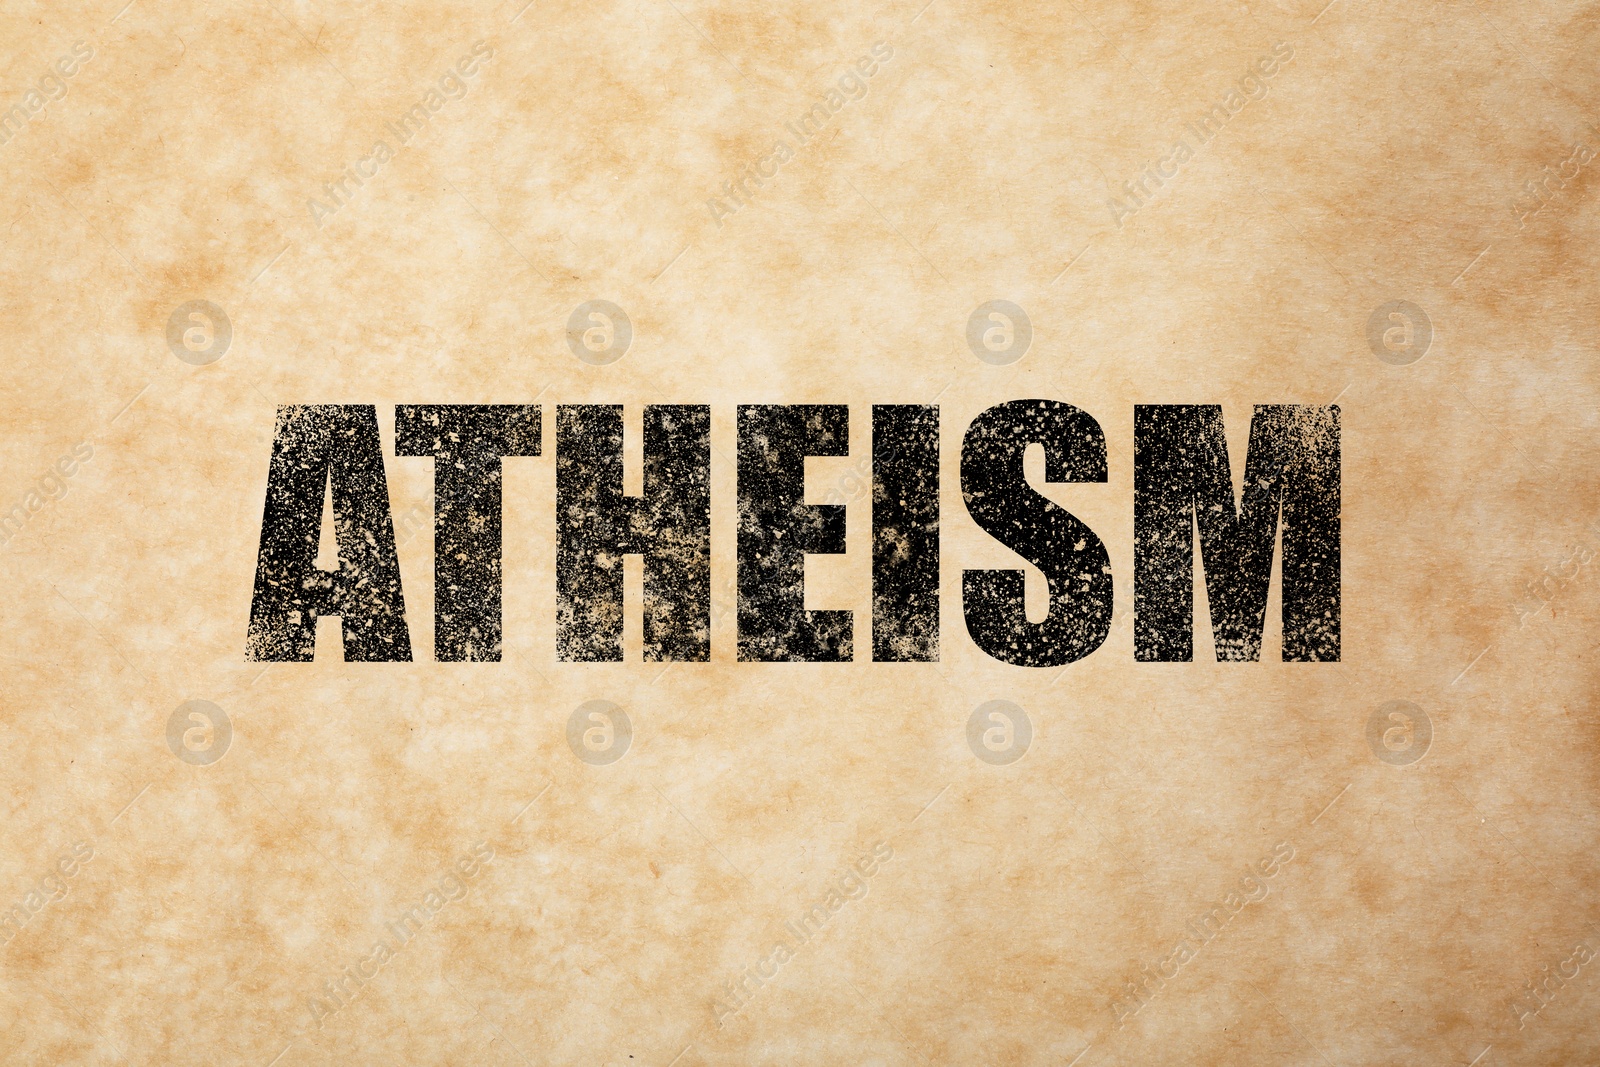 Illustration of Black word Atheism on beige textured background. Philosophical or religious position